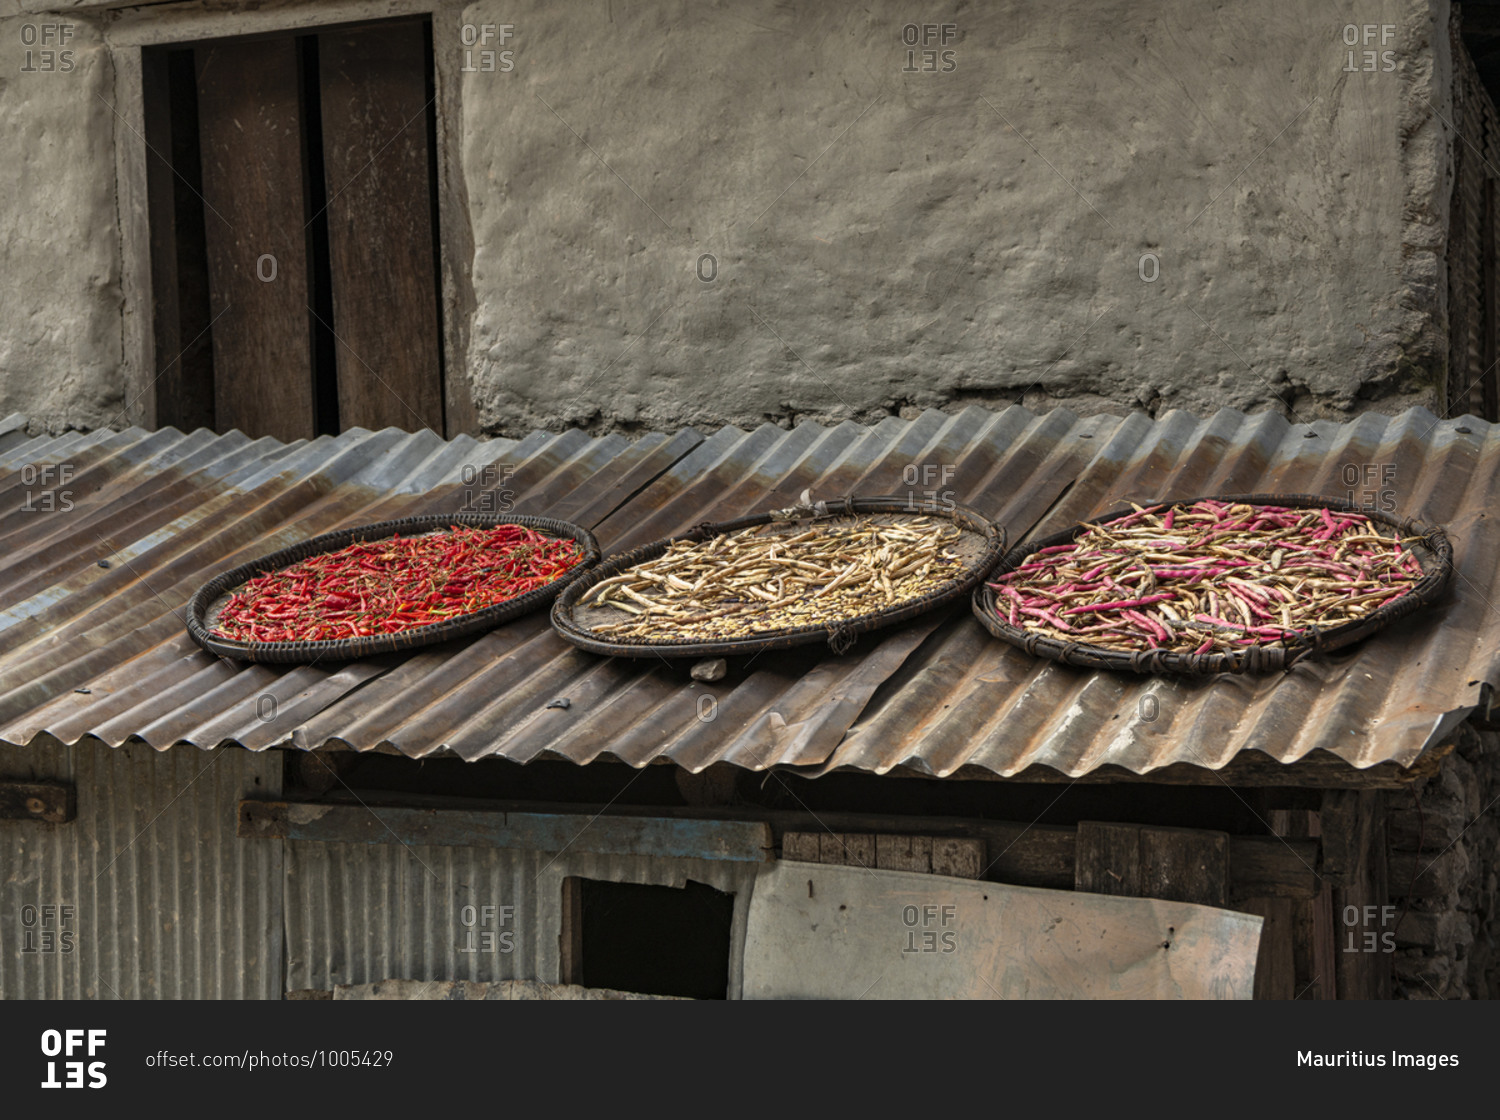 Chilli pods and beans to dry on a roof in Nepal